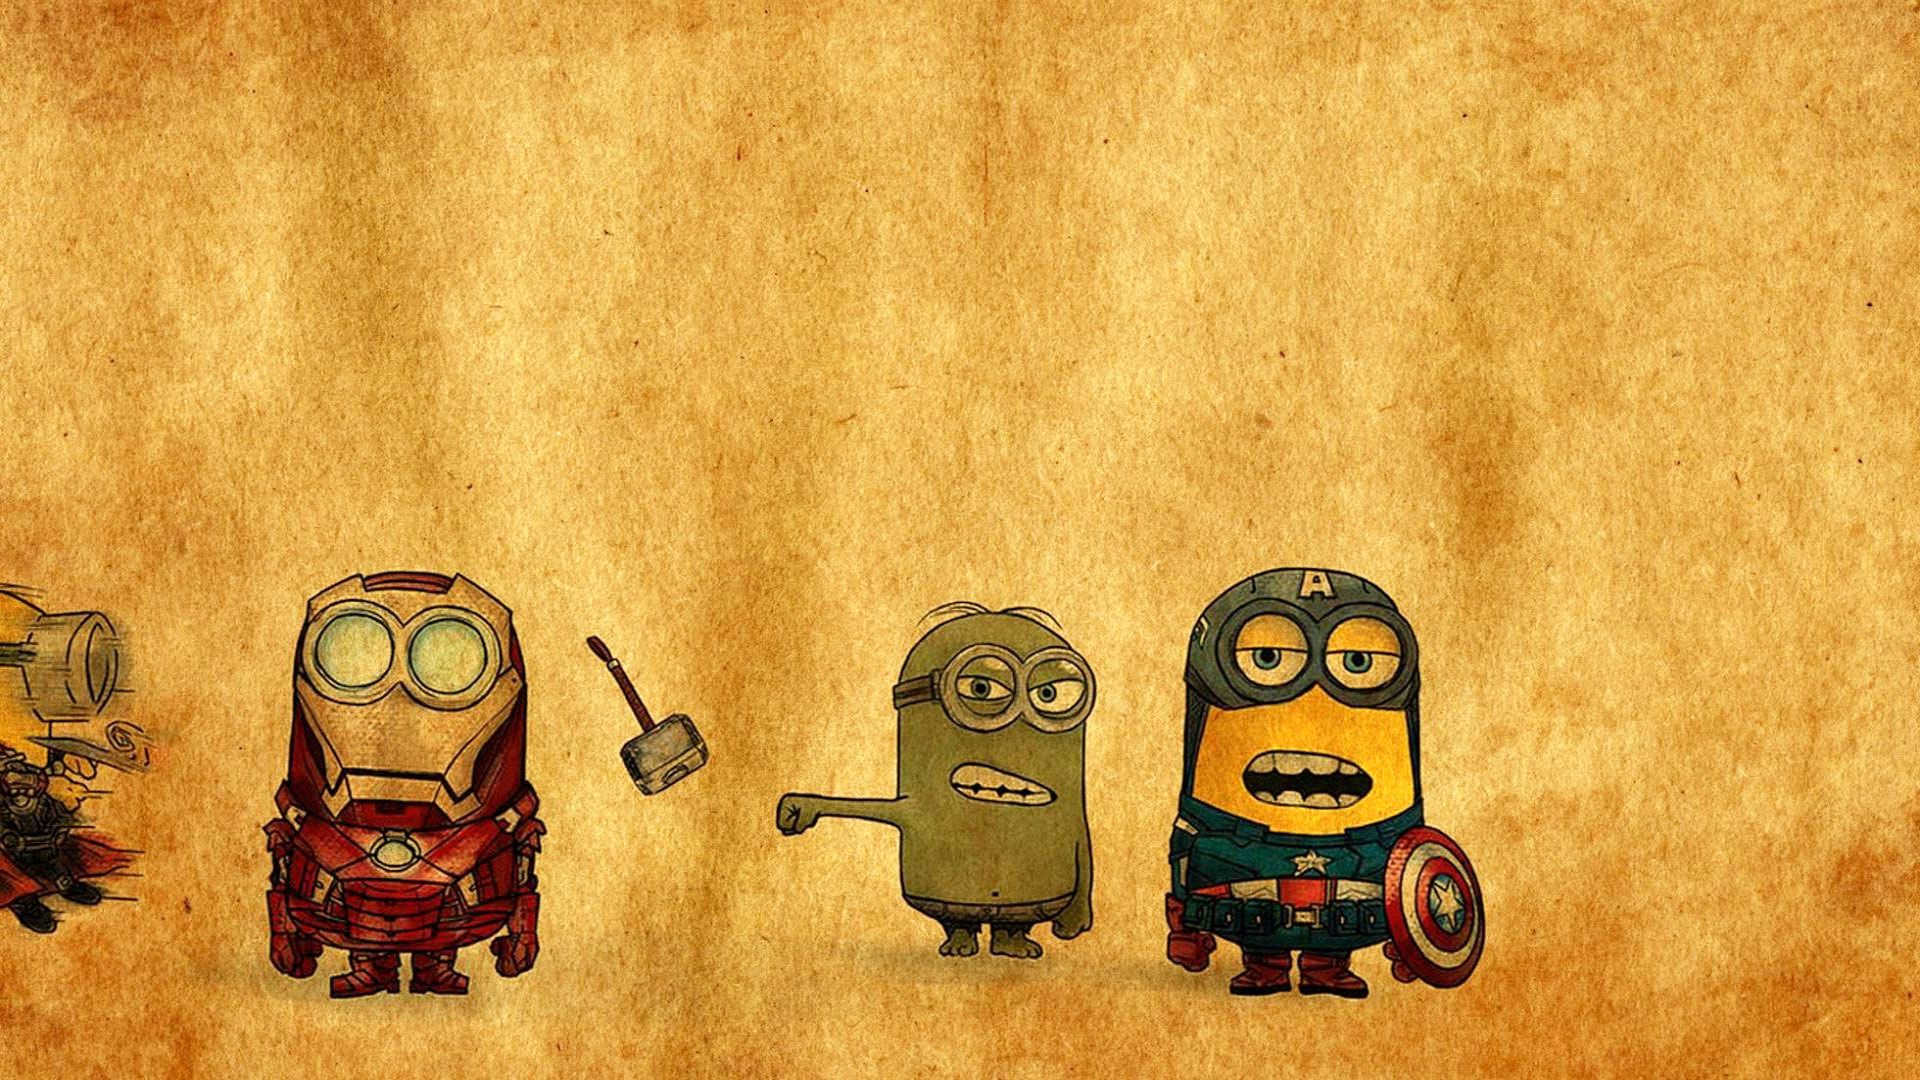 Minions wallpapers on Pinterest | Despicable Me 2, Despicable Me ...